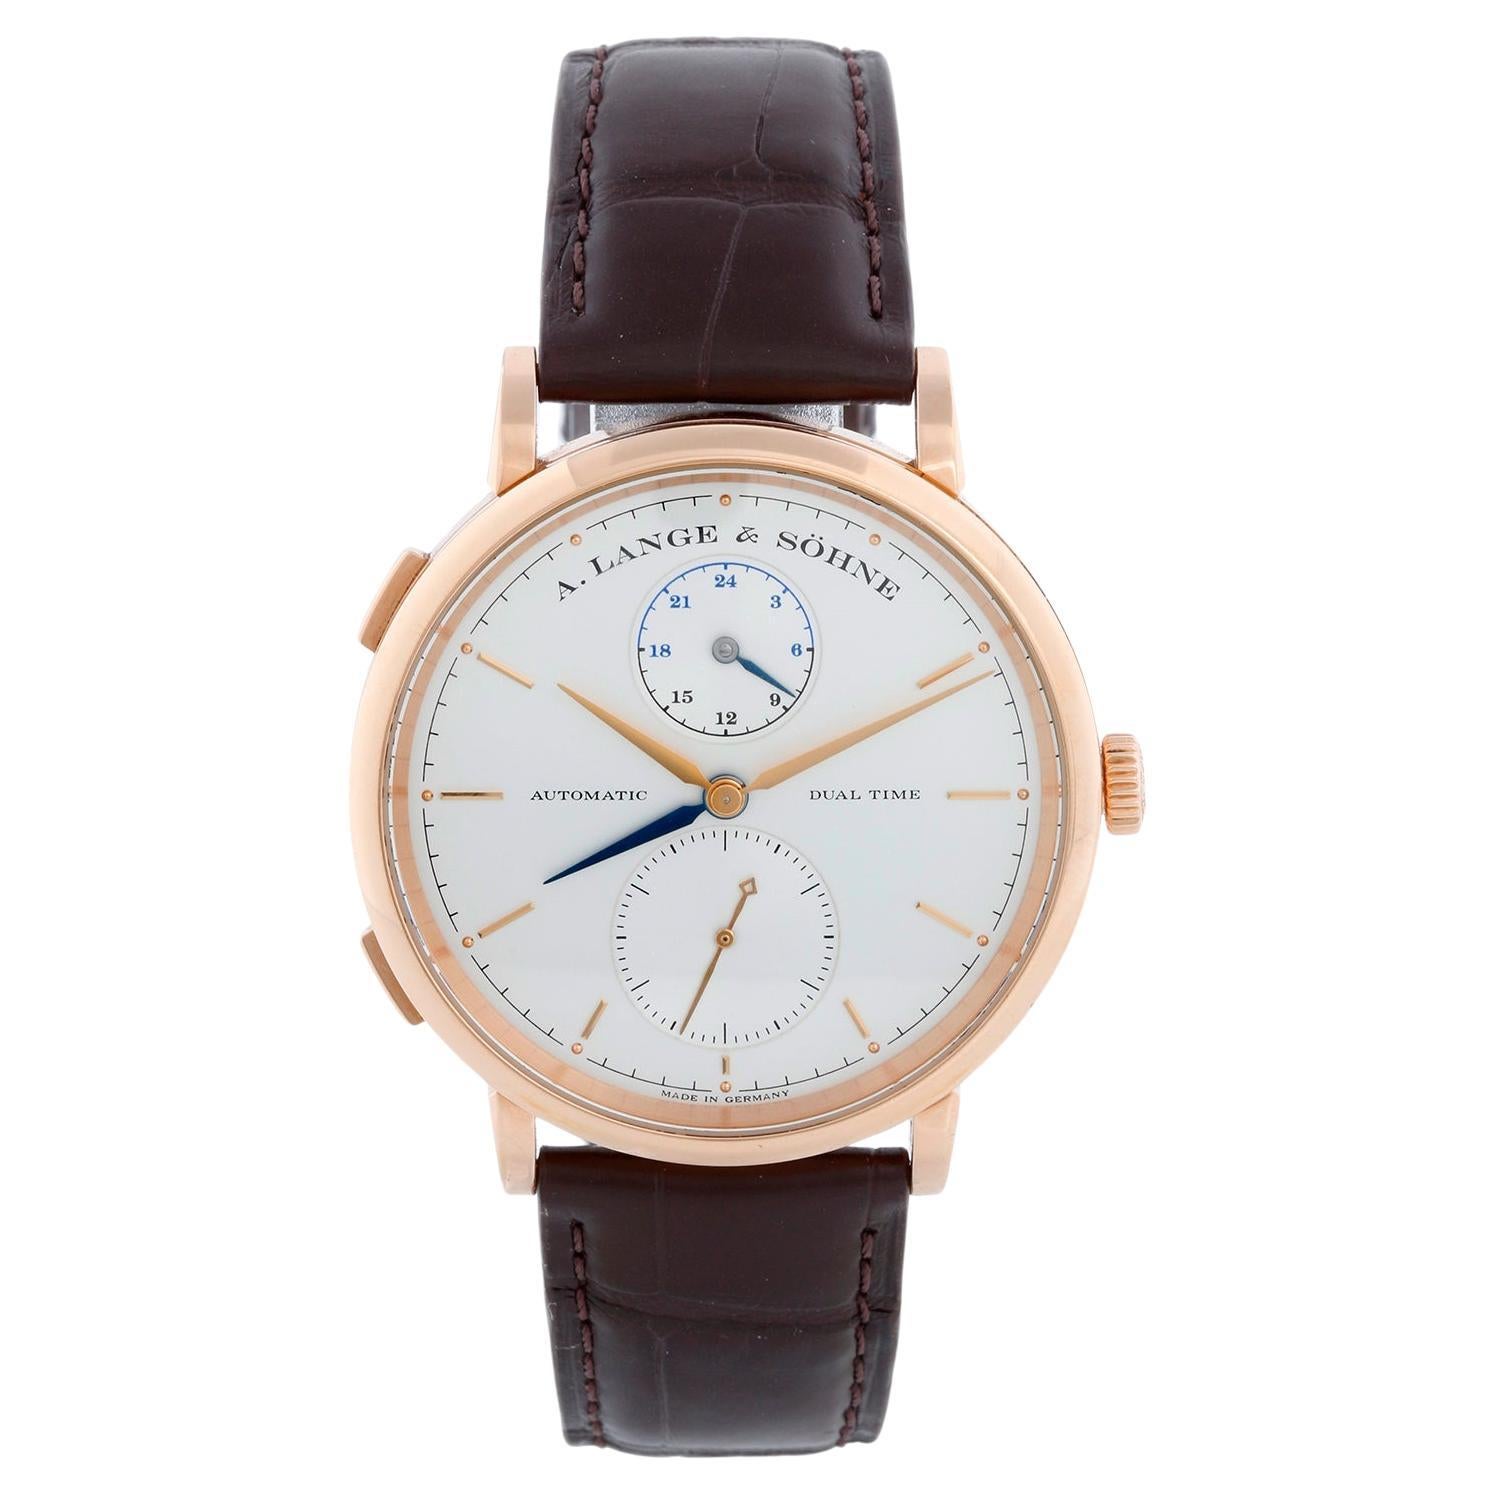 A. Lange & Söhne Saxonia Dual Time Rose Gold  Watch 385.032 For Sale